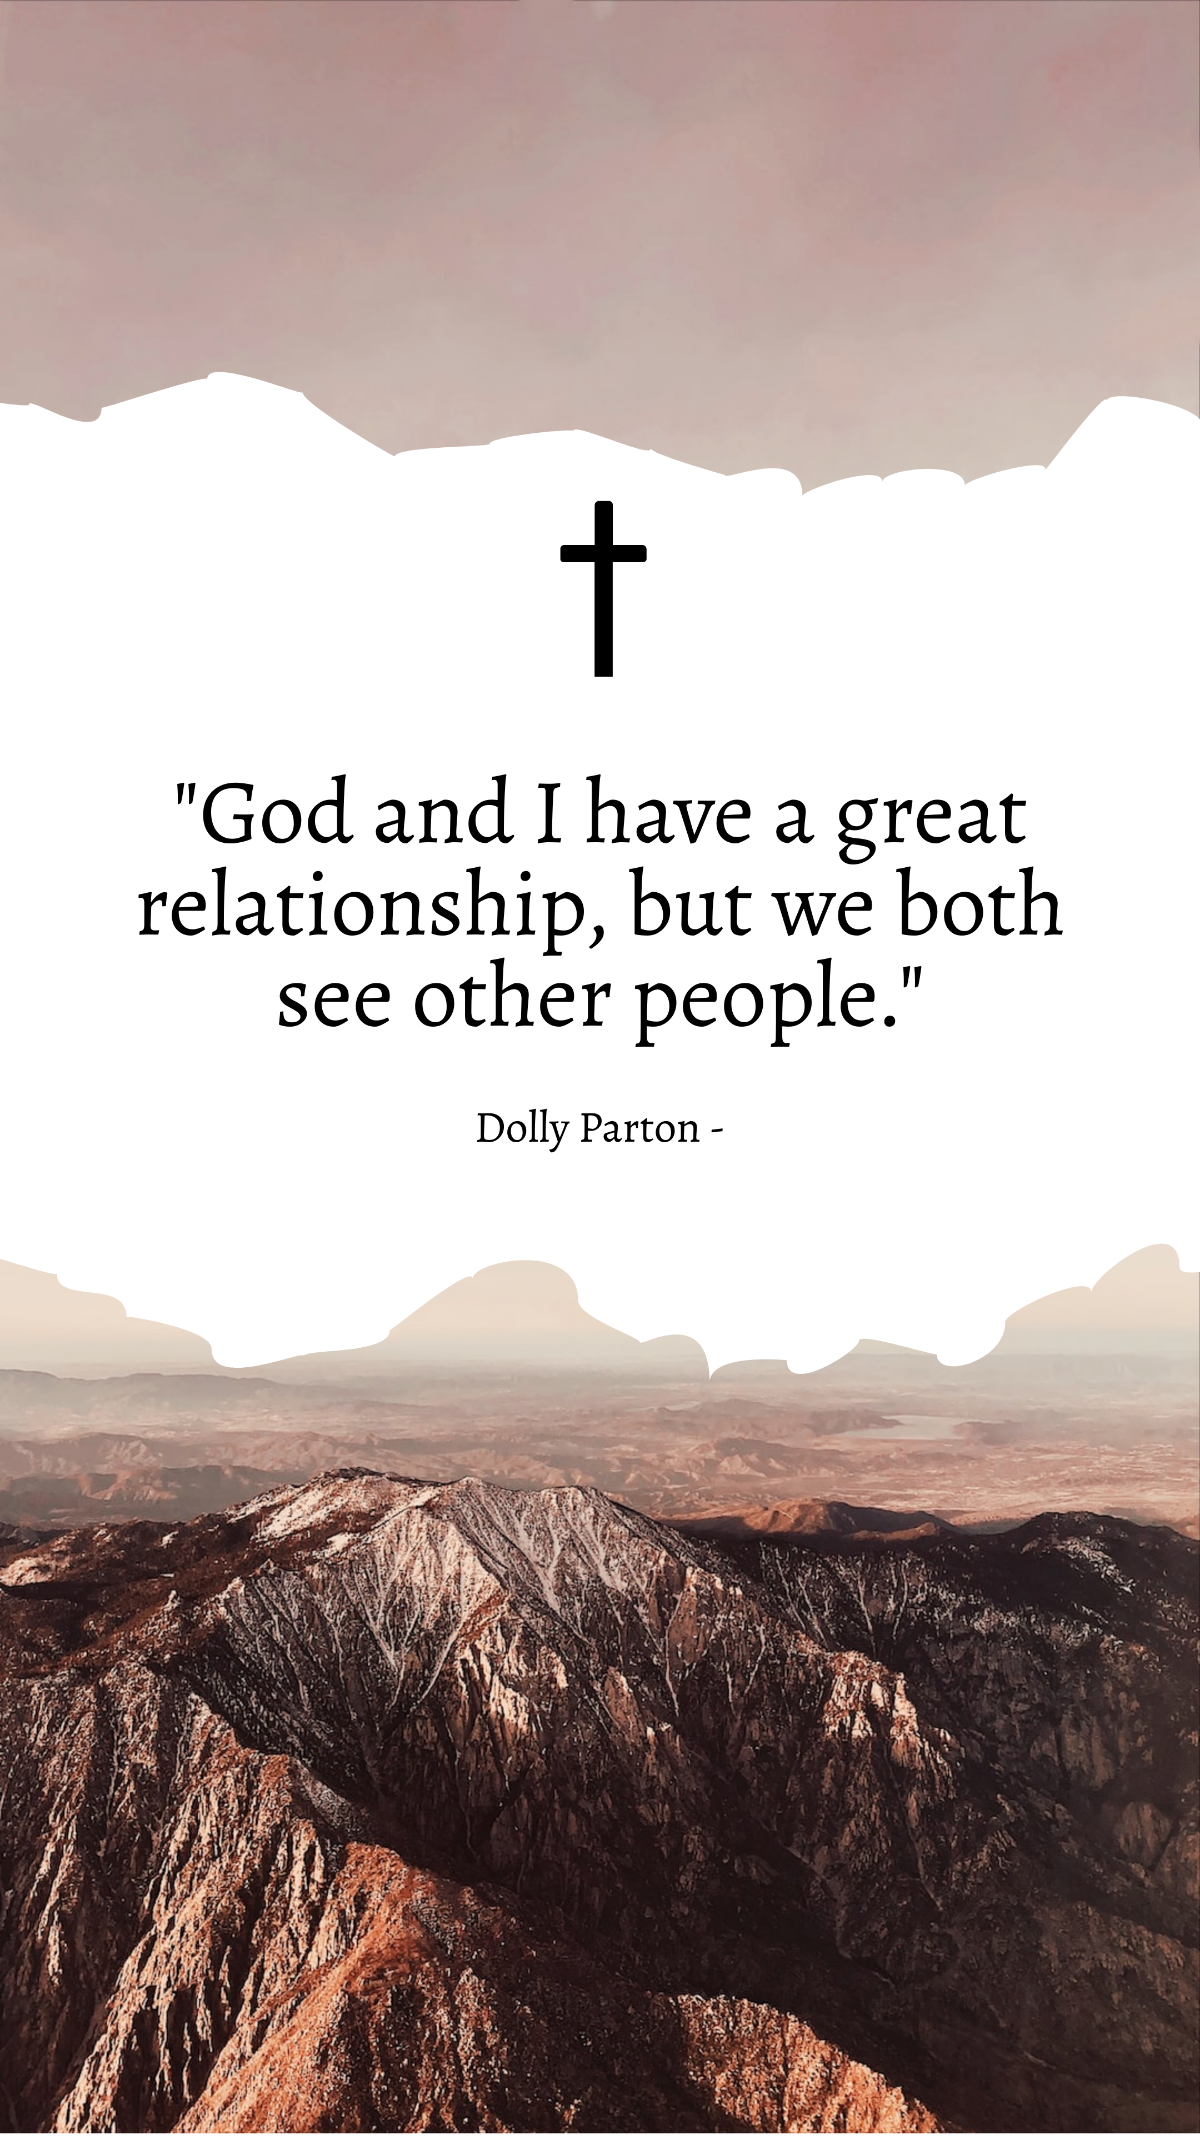 Dolly Parton - God and I have a great relationship, but we both see other people. Template